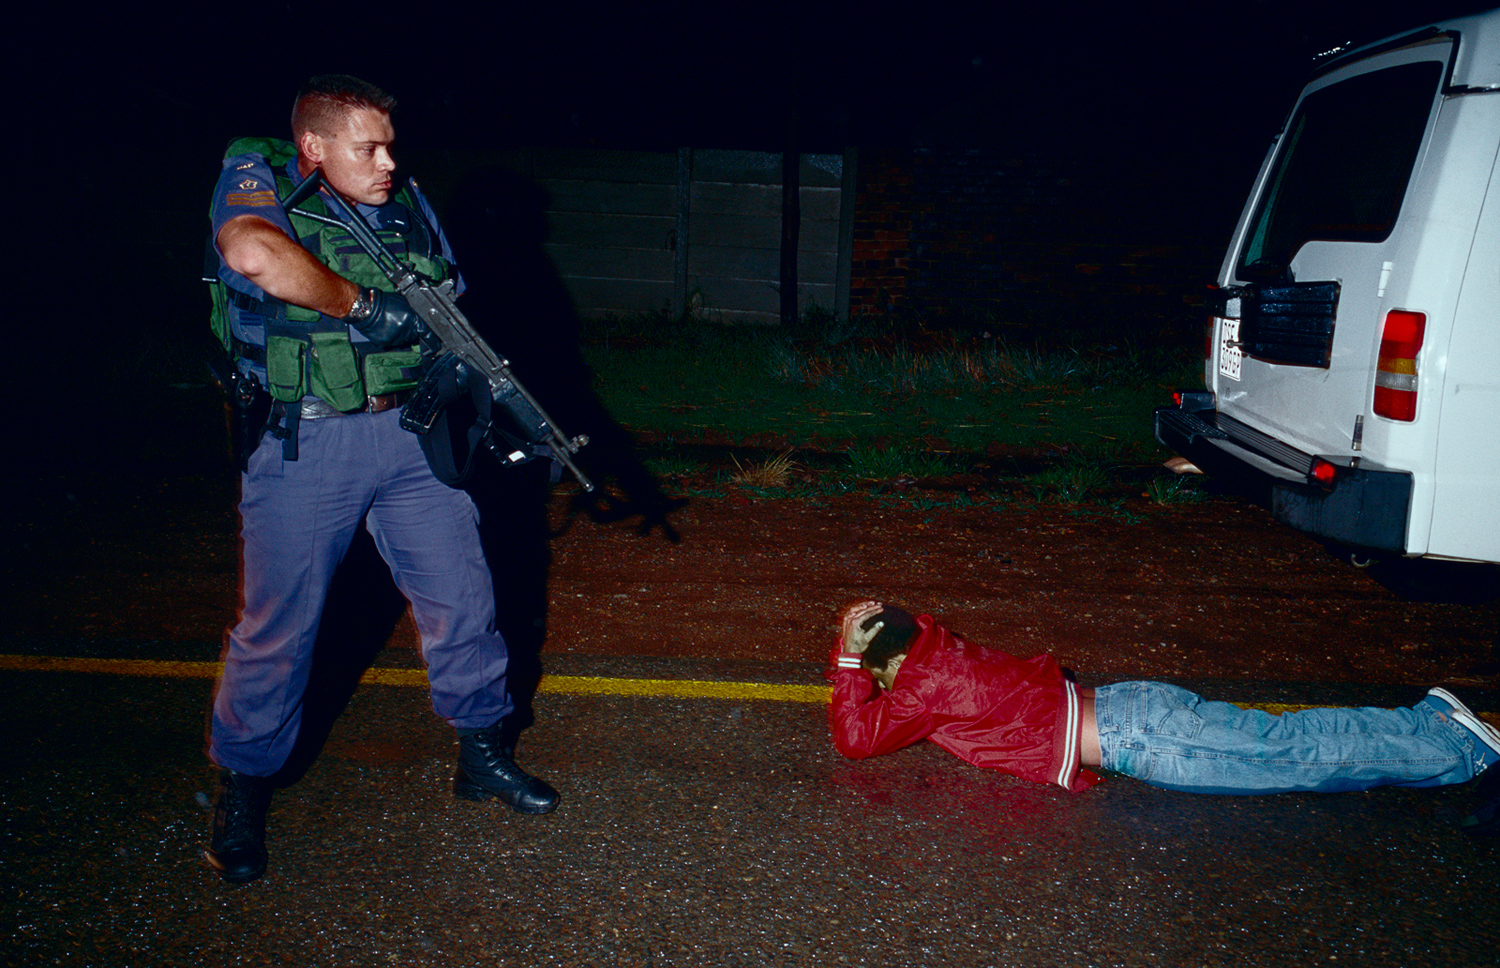 Daniel Lieberman, a Flying Squad police officer arrests a suspected car thief on outside Soweto, Johannesburg, South Africa, March 1999. Flying Squad is a rapid response unit working in South Africa's larger cities, and they have a reputation for being hard on suspected criminals. South Africa has some of the highest crime statistics in the world, especially in carjackings, armed robberies and rape.